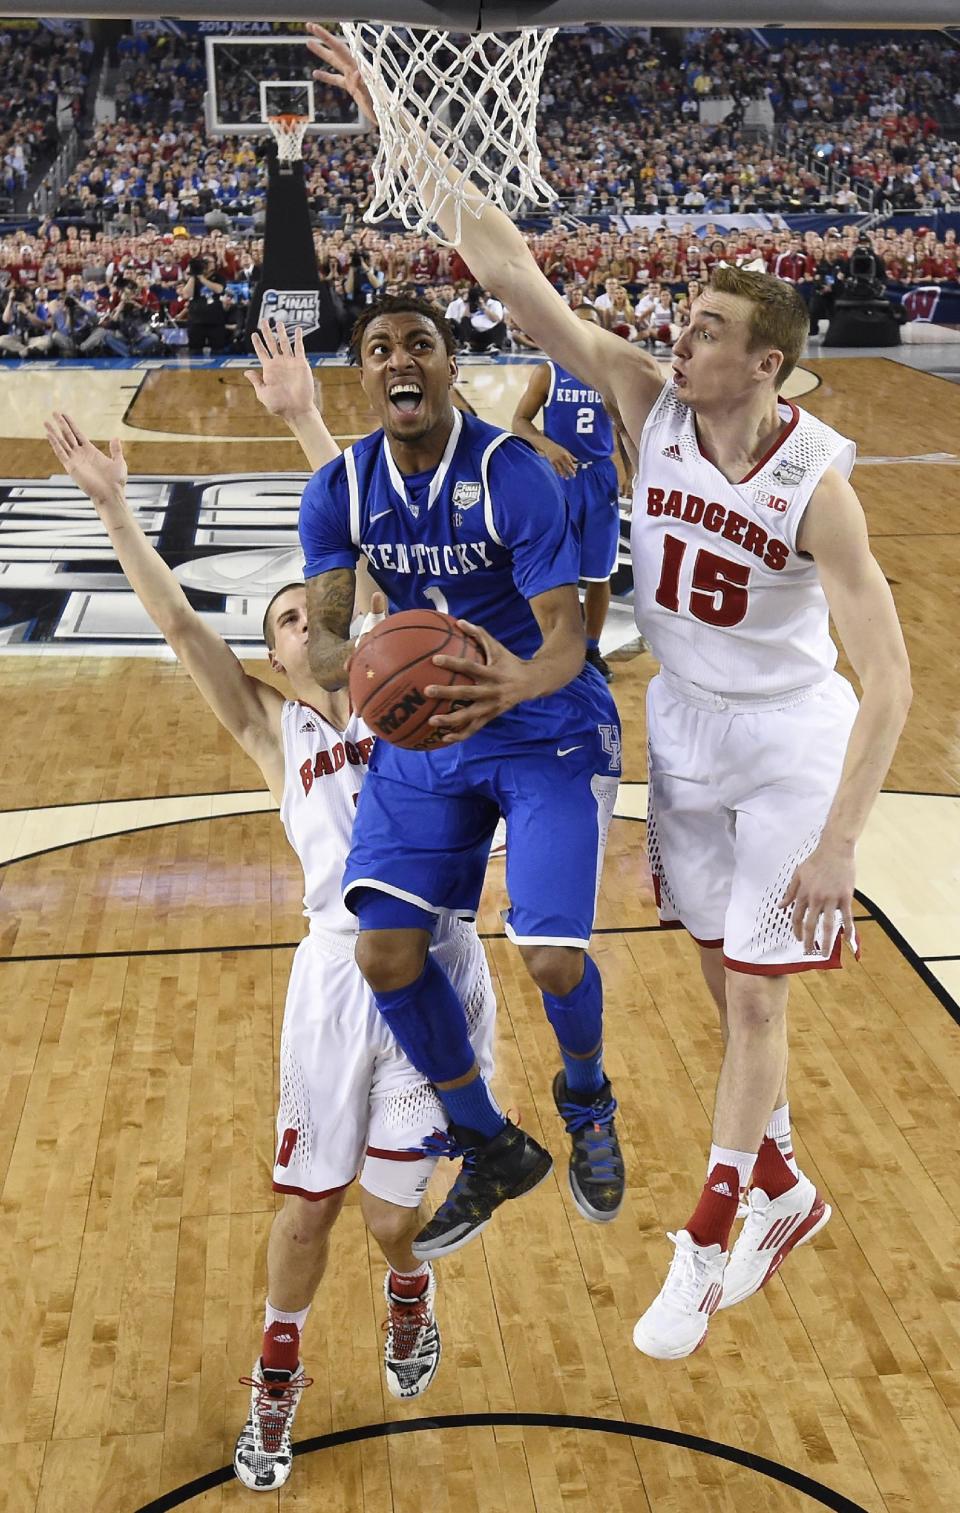 Kentucky guard James Young, center, drives to the basket between Wisconsin's Ben Brust, left, and Sam Dekker during the second half of an NCAA Final Four tournament college basketball semifinal game Saturday, April 5, 2014, in Arlington, Texas. (AP Photo/Chris Steppig, pool)